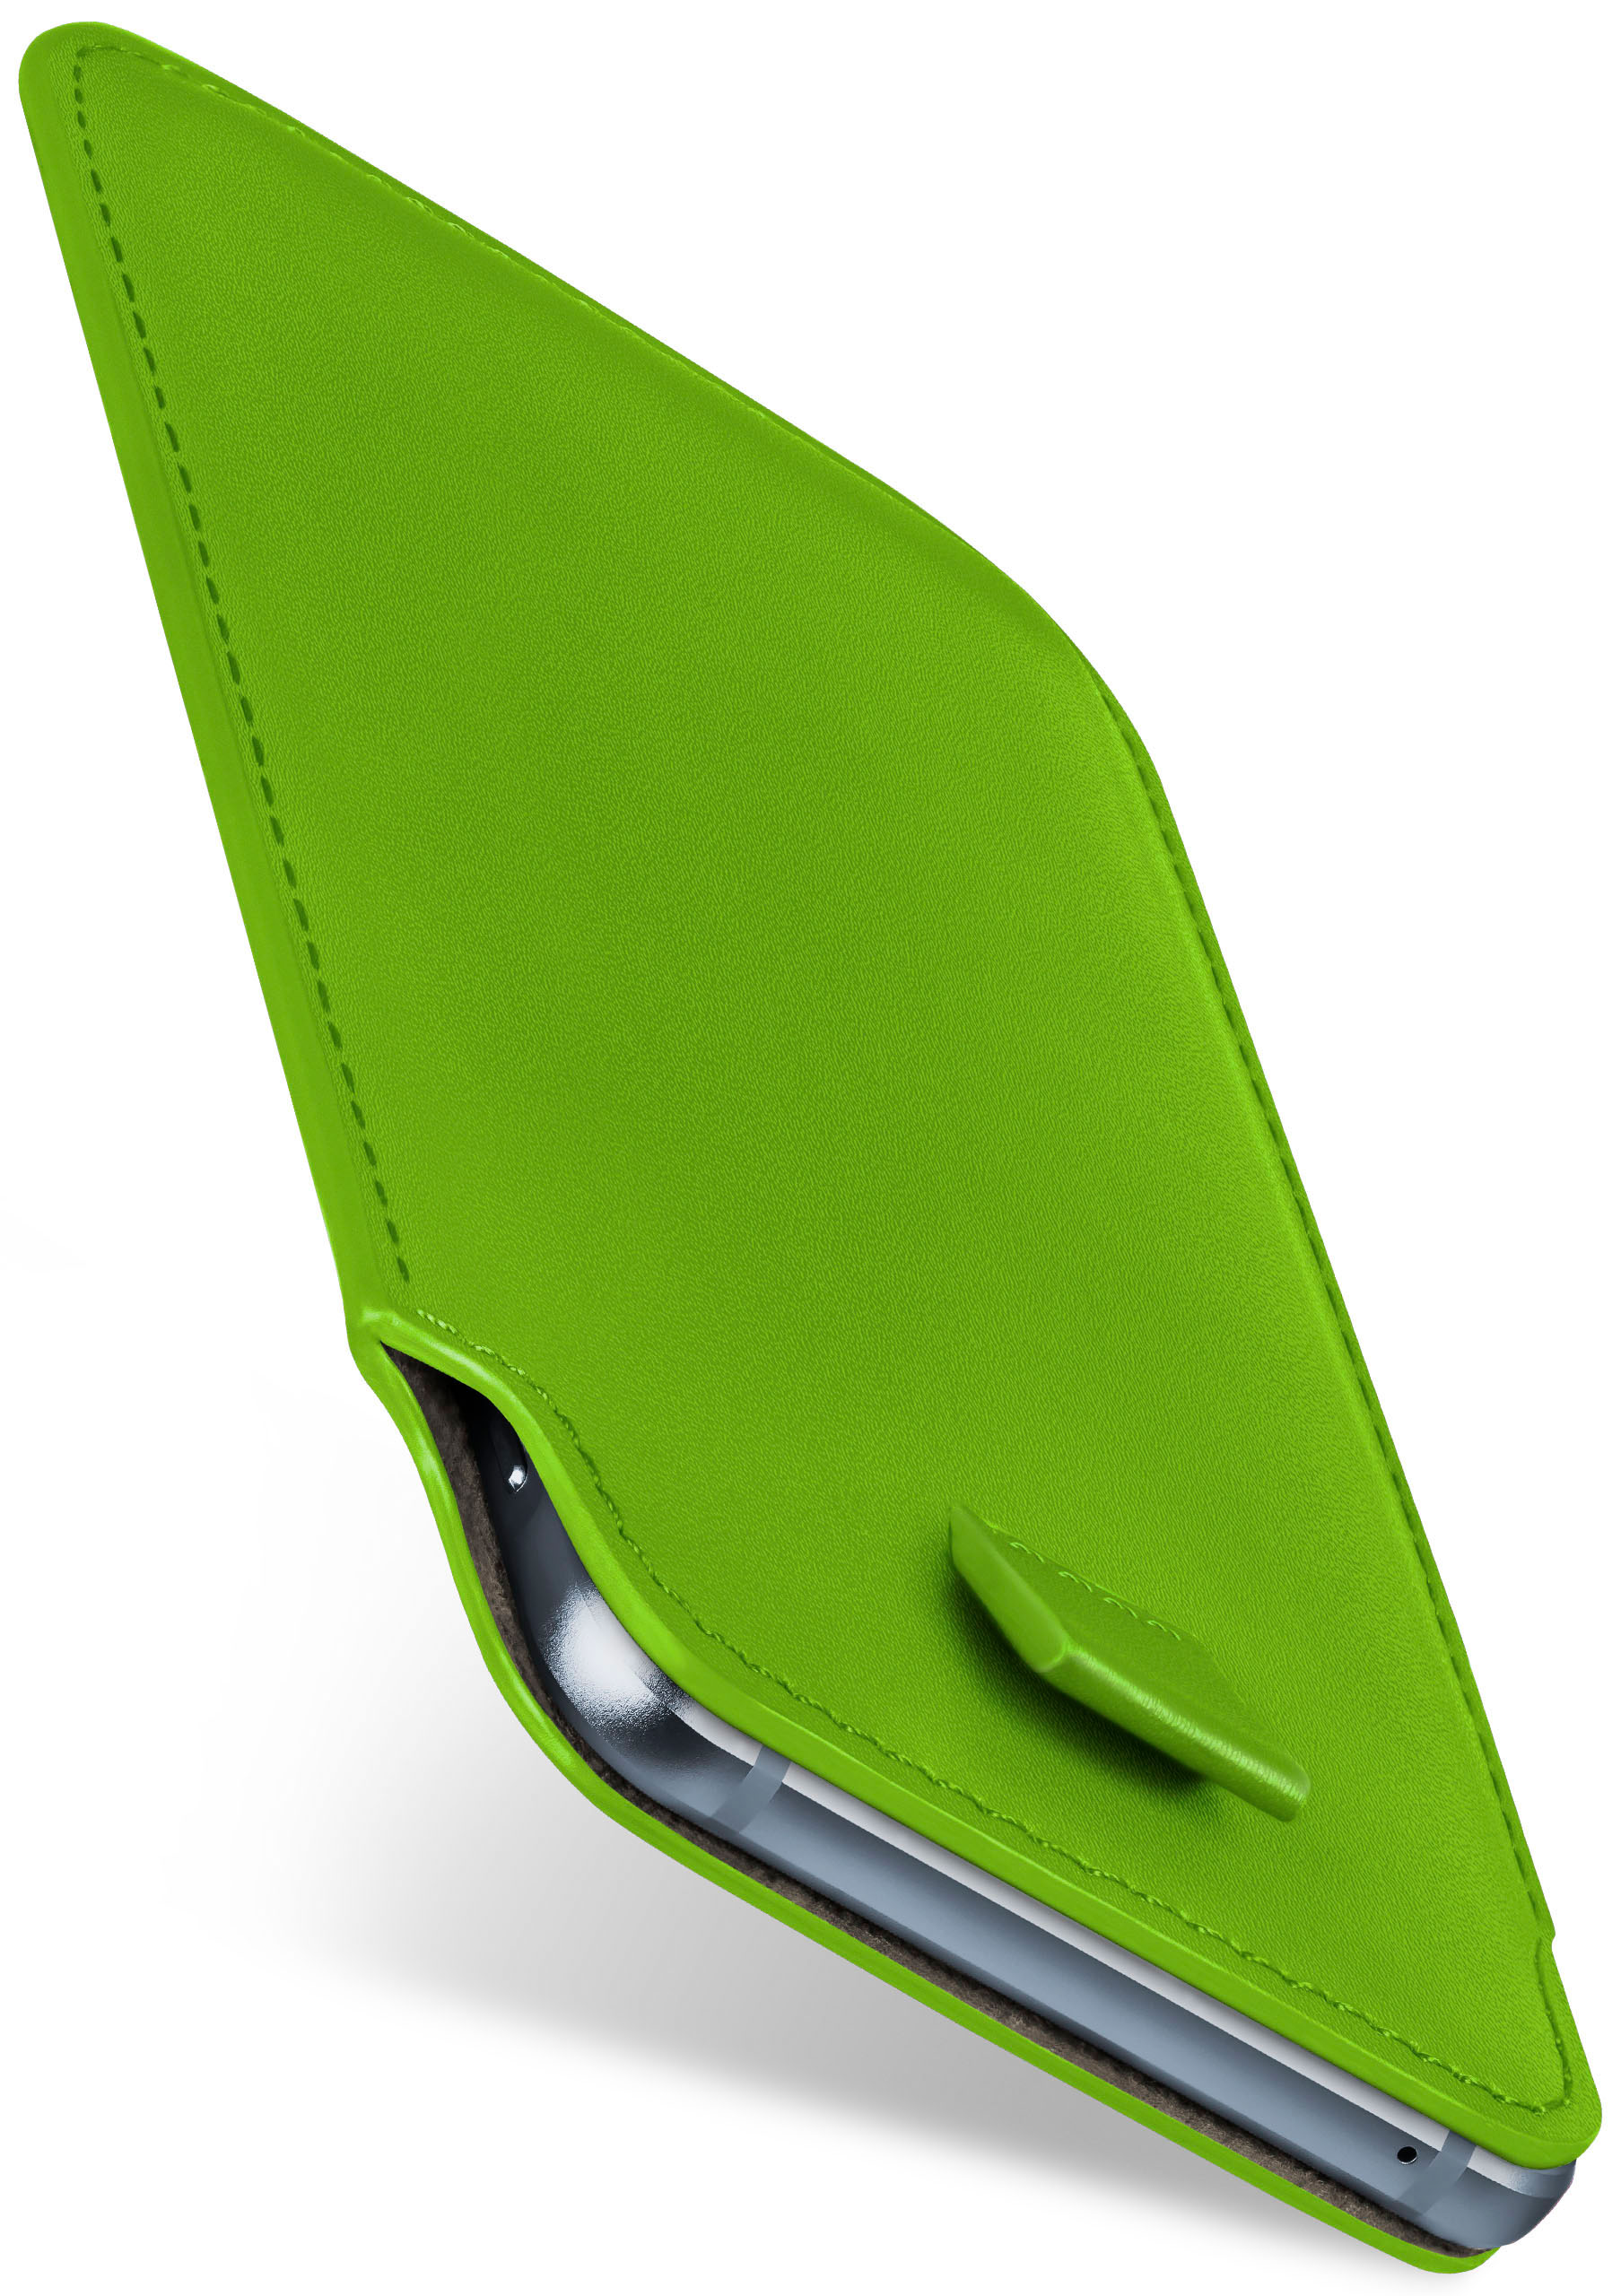 Plus, MOEX Cover, Slide 7 8 Full iPhone iPhone Apple, Plus / Lime-Green Case,